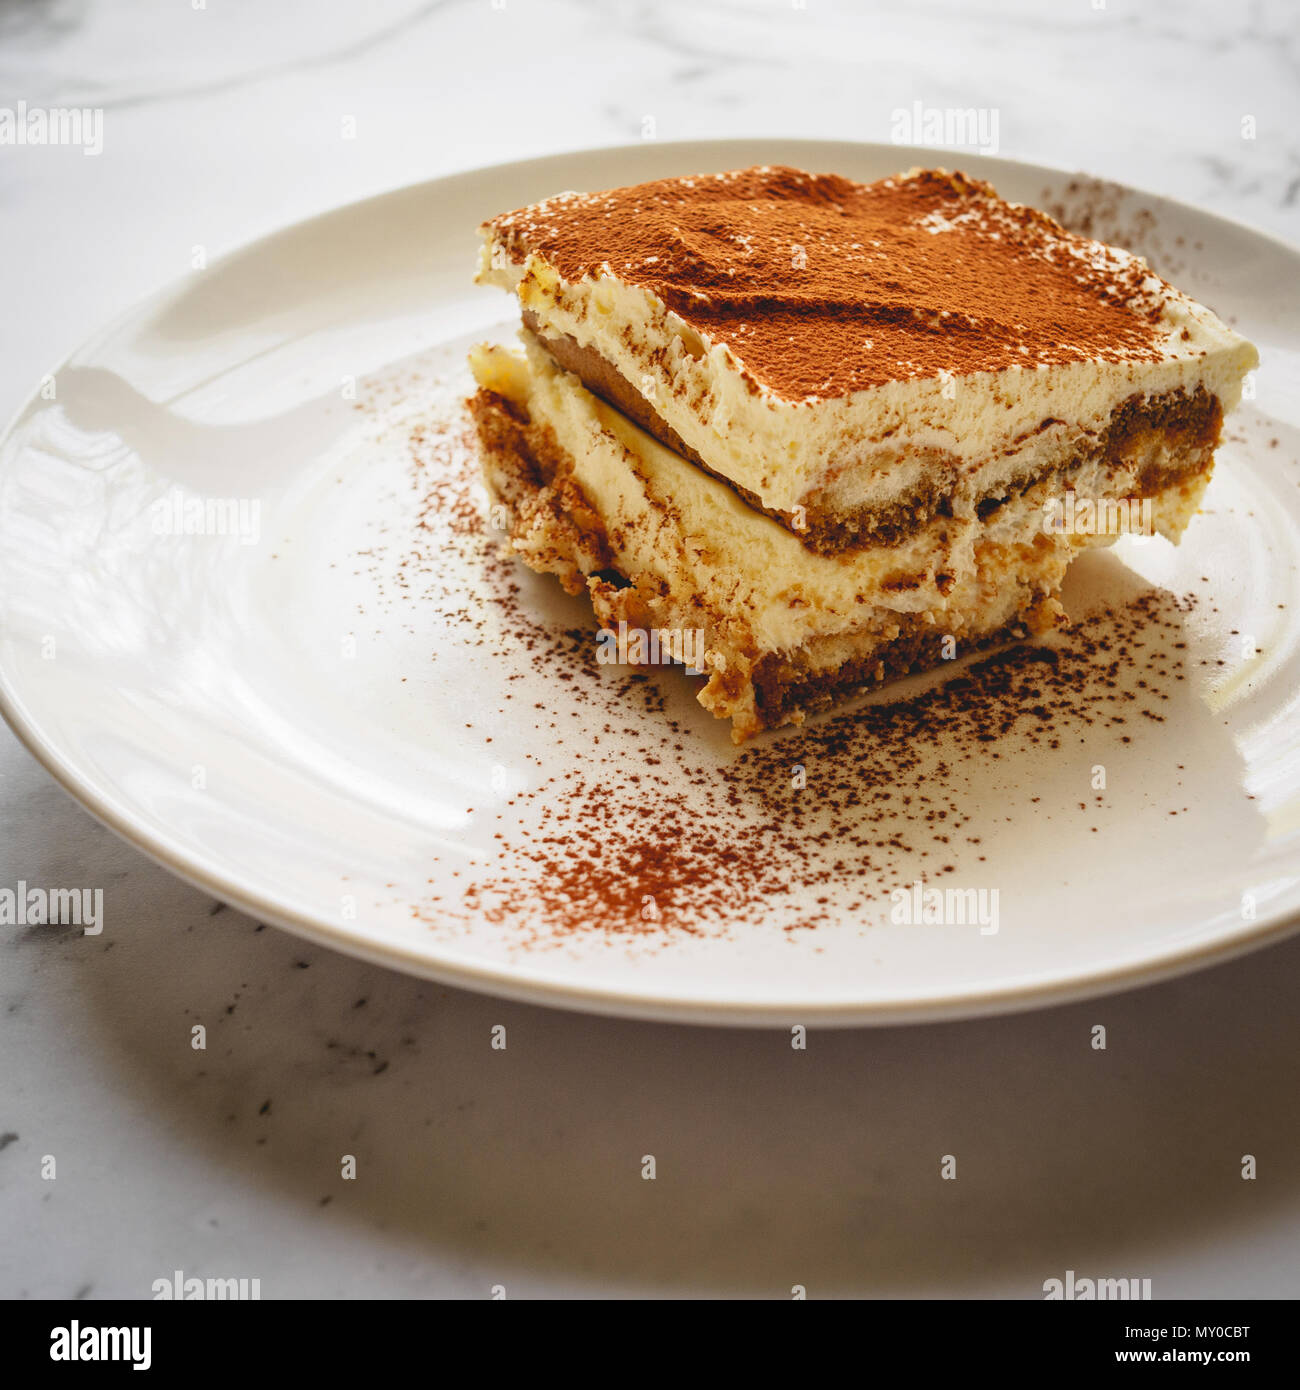 Close Up Of A Slice Of Homemade Tiramisu Traditional Italian Dessert On A White Plate With A Spoon On A Marble Board Square Format Stock Photo Alamy